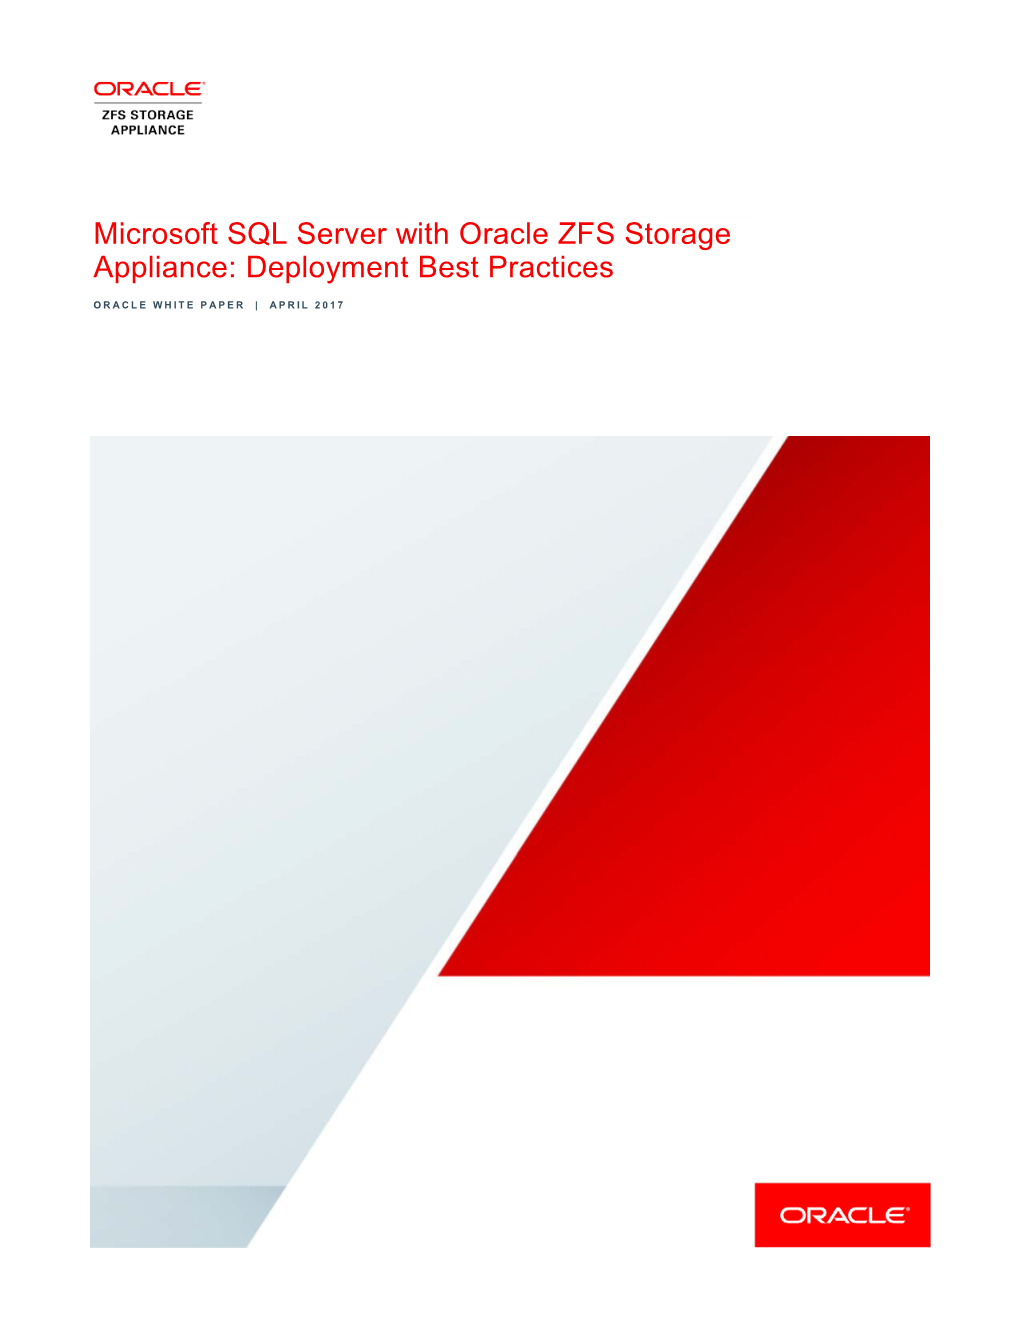 Microsoft SQL Server with Oracle ZFS Storage Appliance: Deployment Best Practices